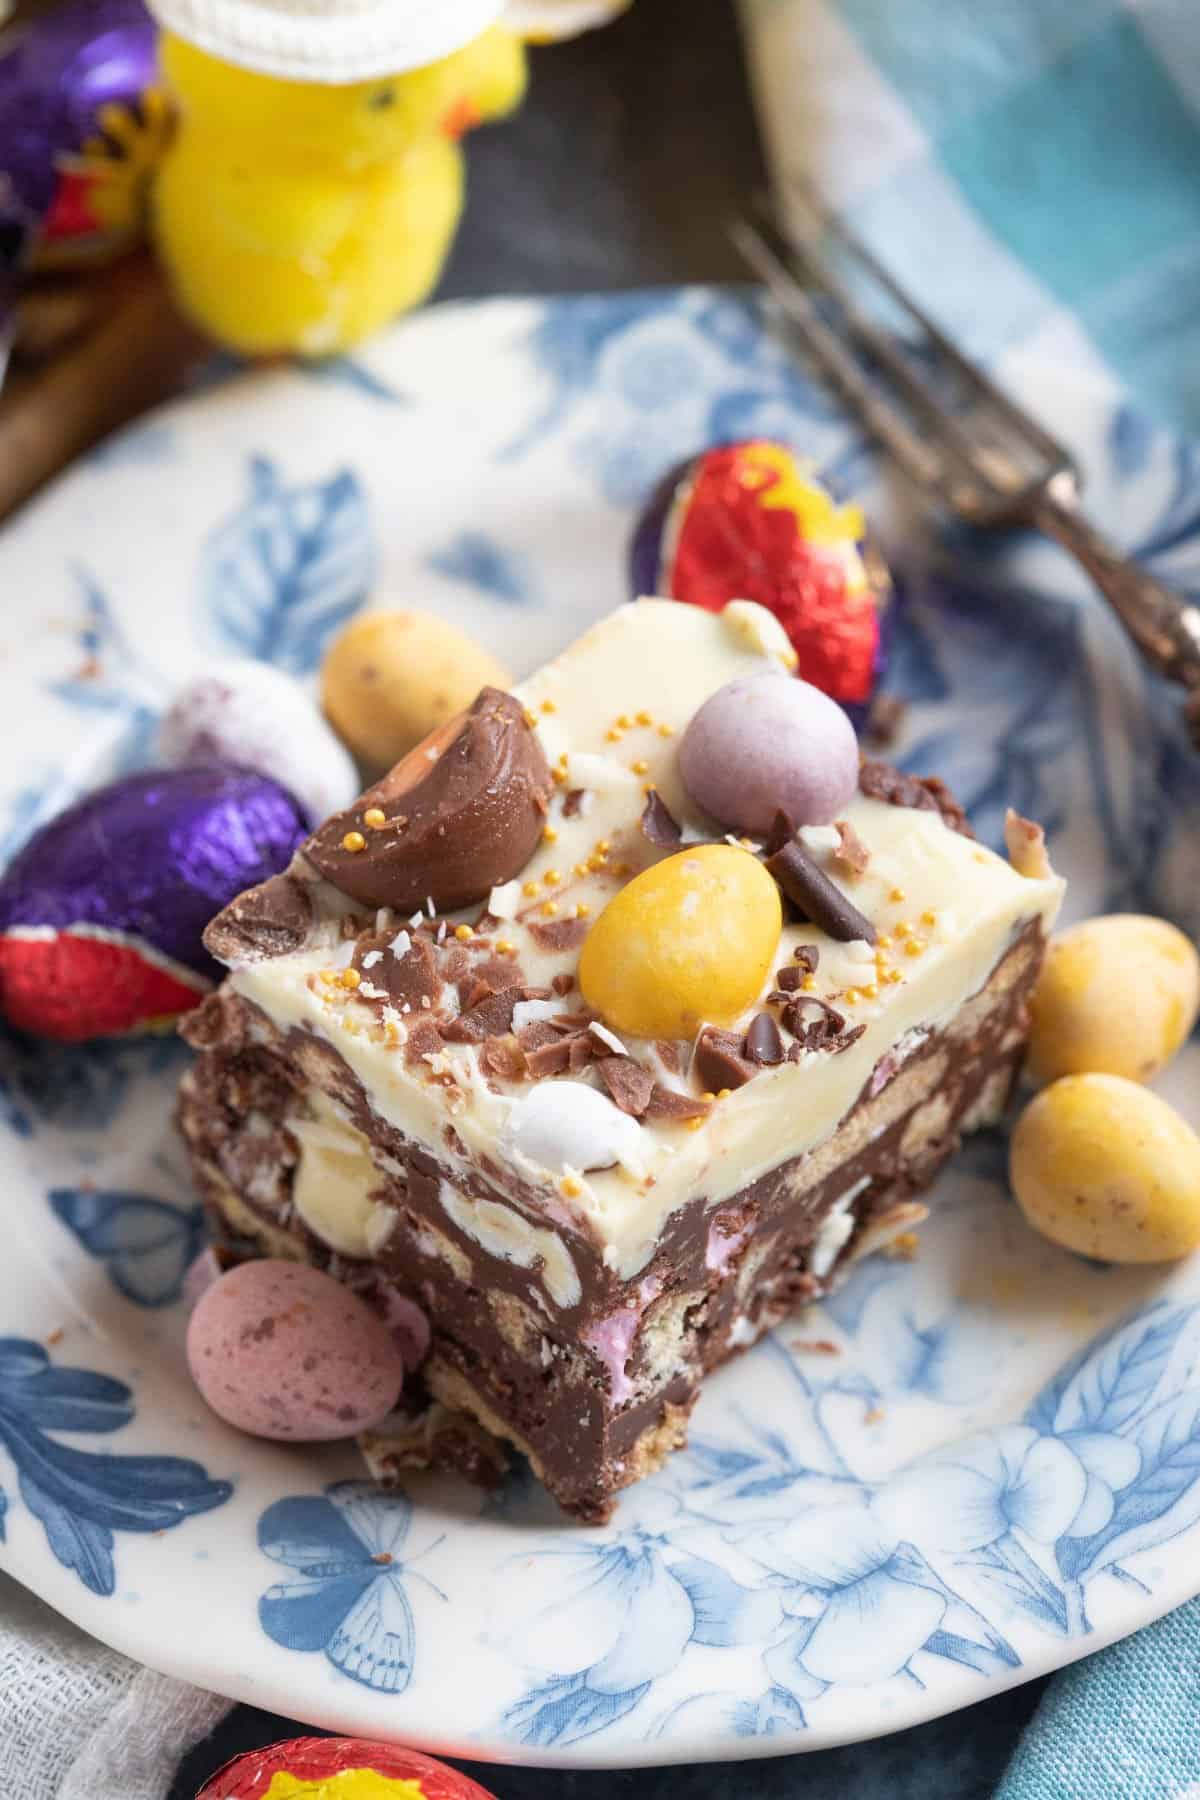 A slice of Easter egg rocky road.